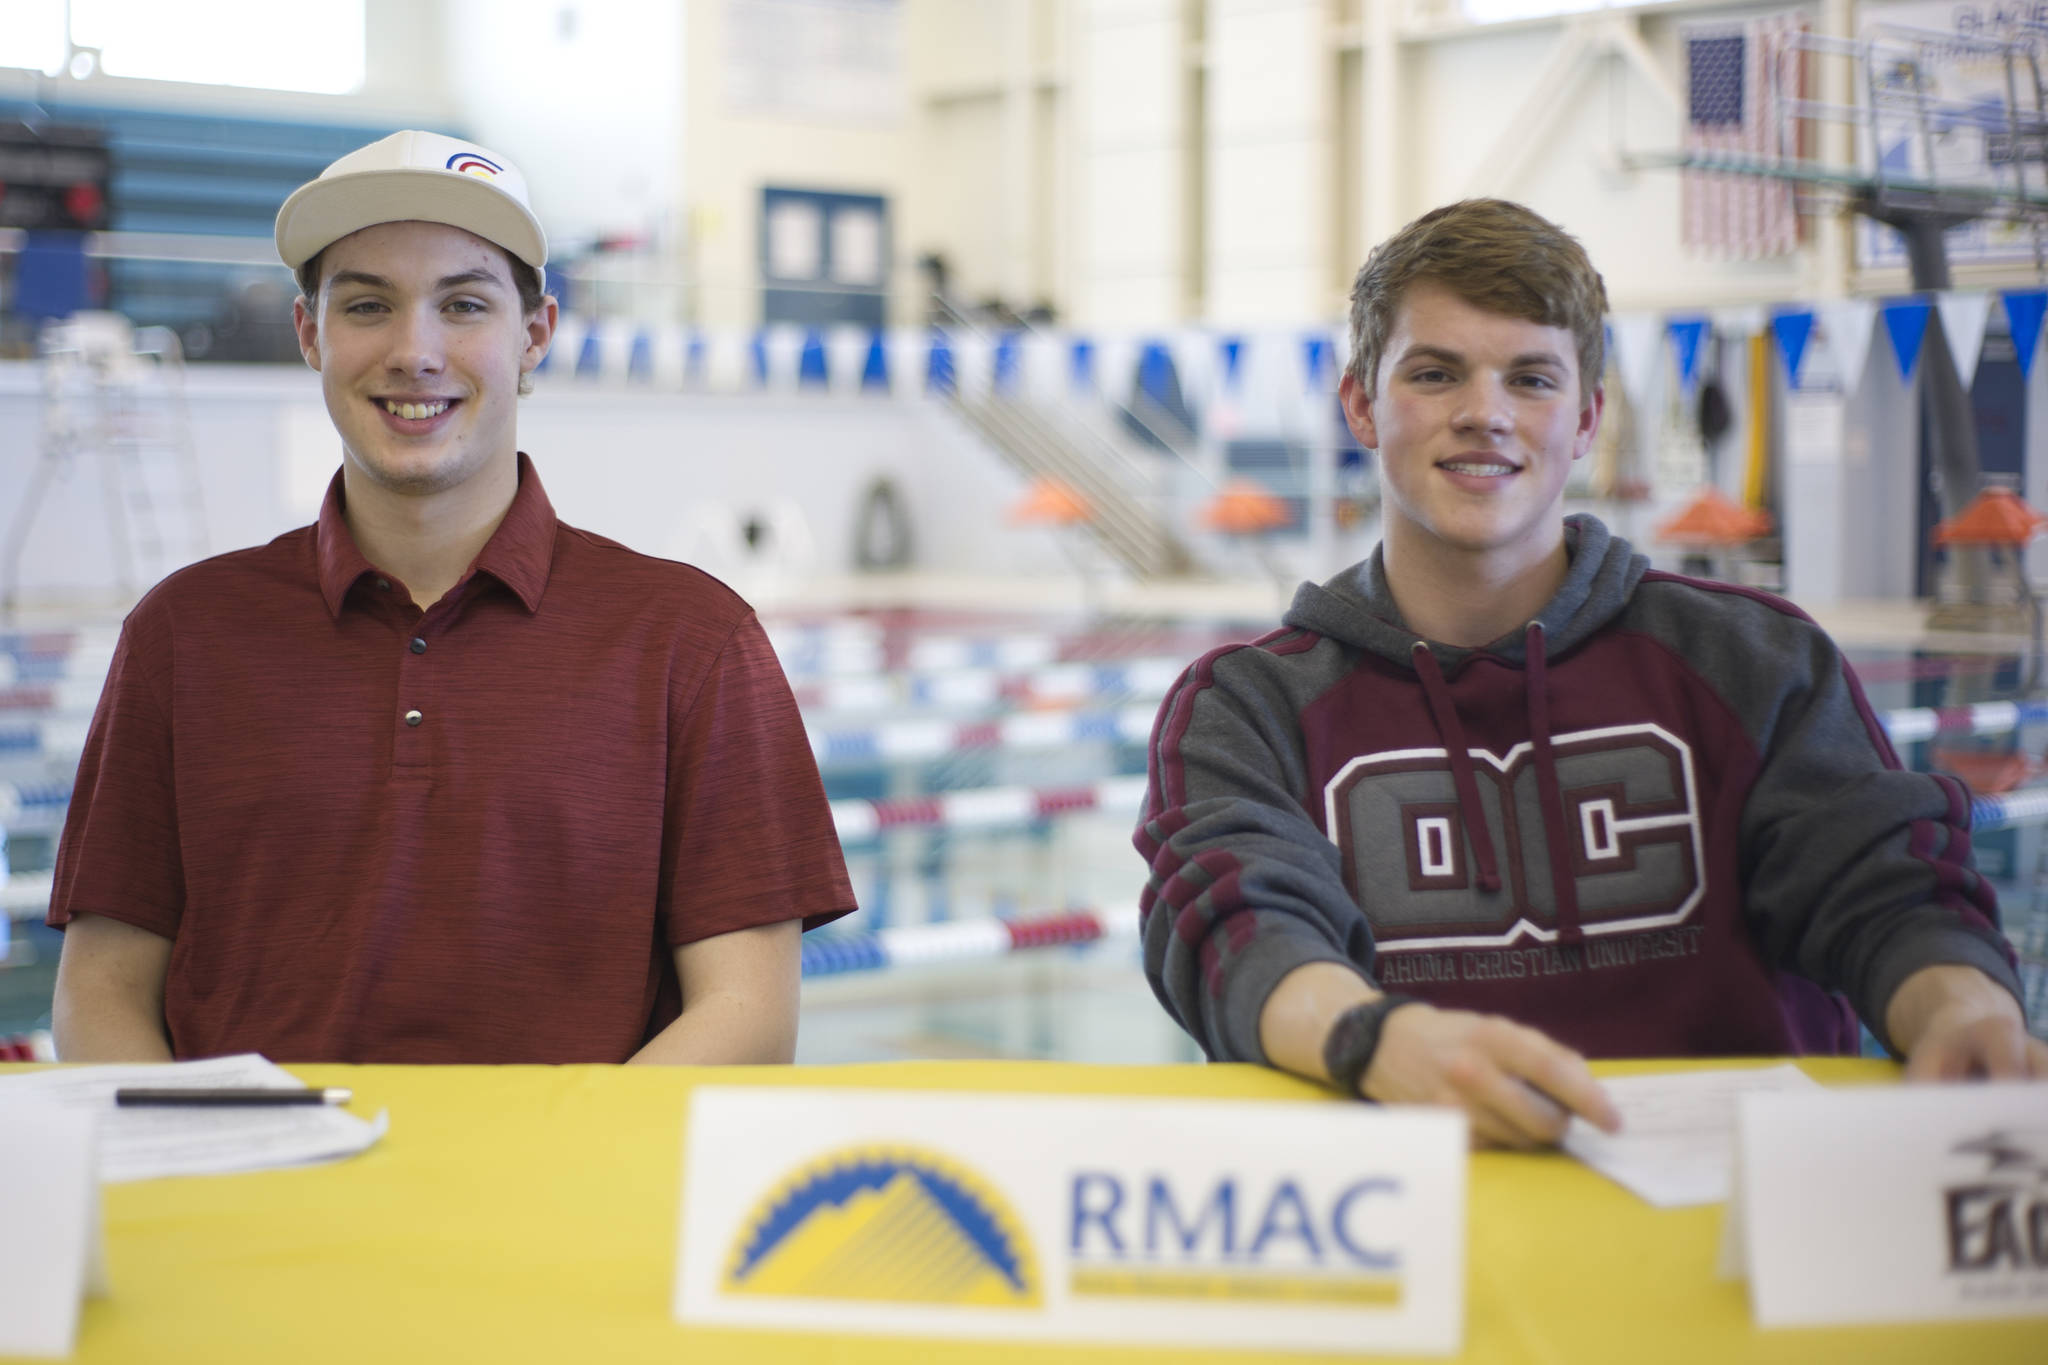 Thunder Mountain High School swimmers Casey Hamilton, left, and Bergen Davis after signing national letter of intents at the Dimond Park Aquatics Center on Wednesday. Hamilton is headed to Mesa College in Grand Junction, Colorado, and Davis is off to Oklahoma Christian University in Edmond, Oklahoma. (Nolin Ainsworth | Juneau Empire)